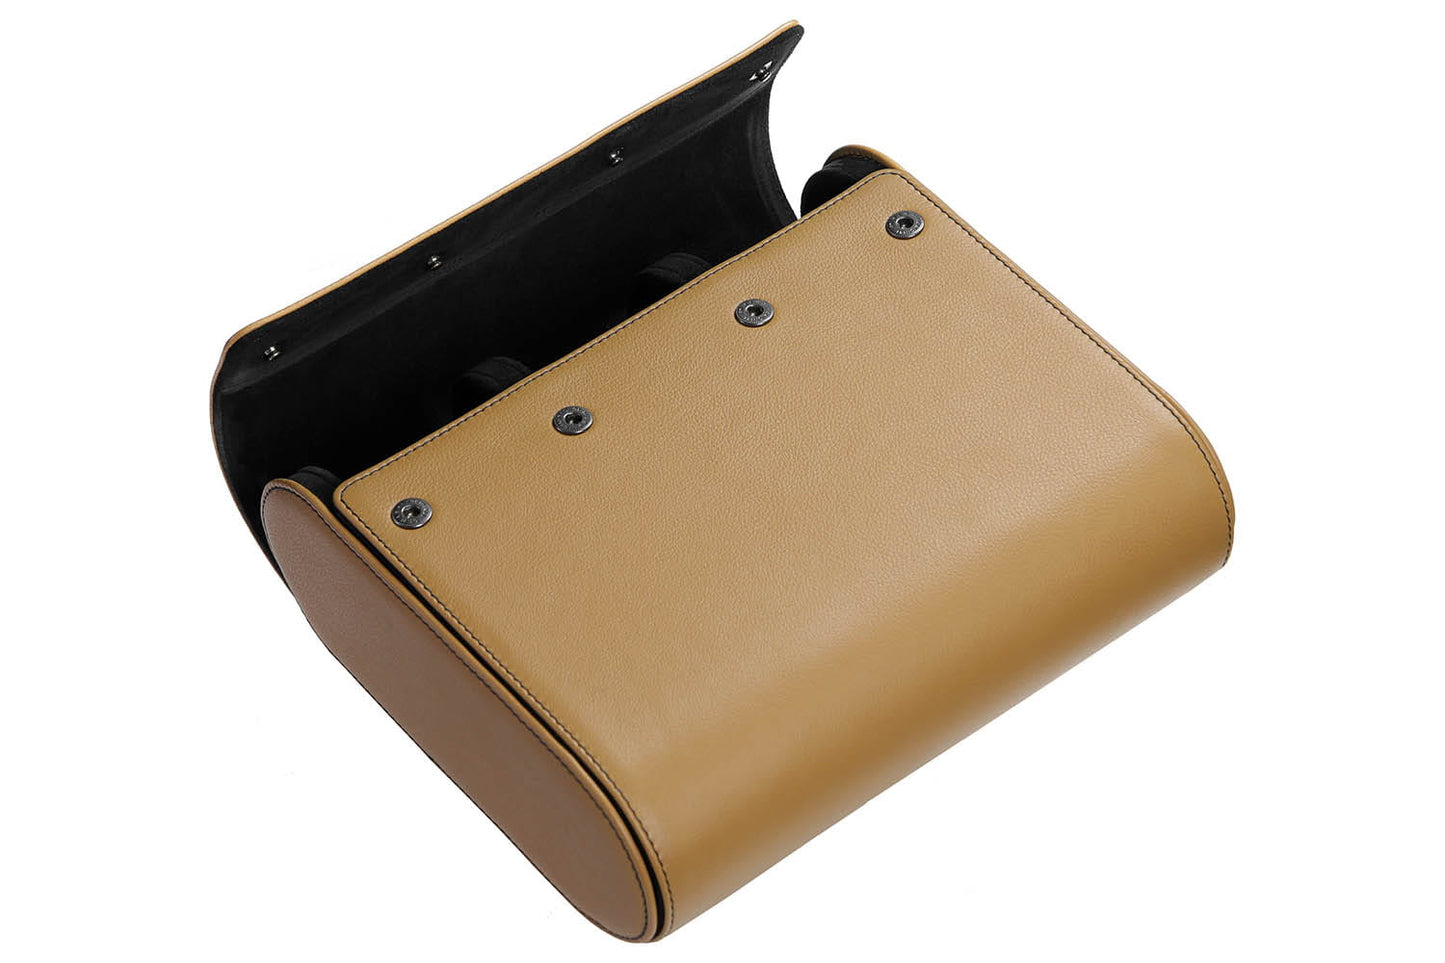 Leather Watch Case for 6 watches - Light Brown / Black